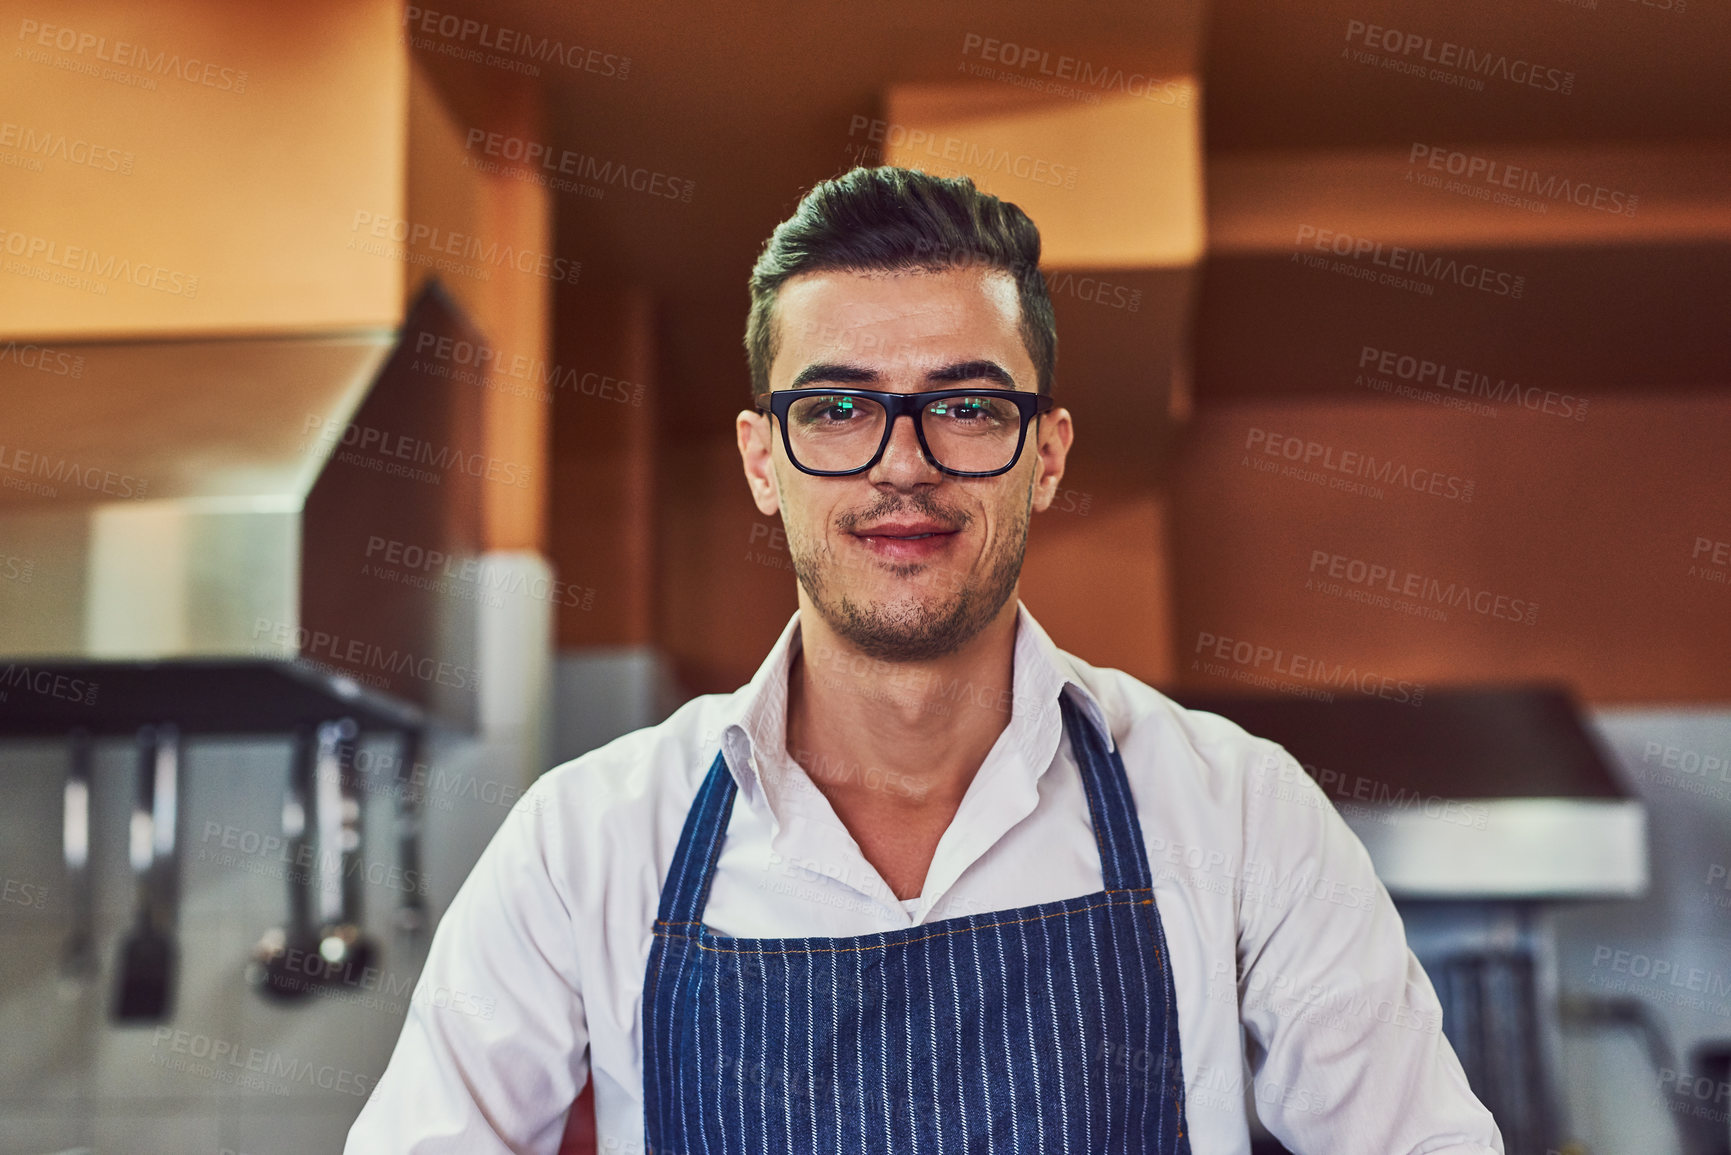 Buy stock photo Shot of a man working at a restaurant